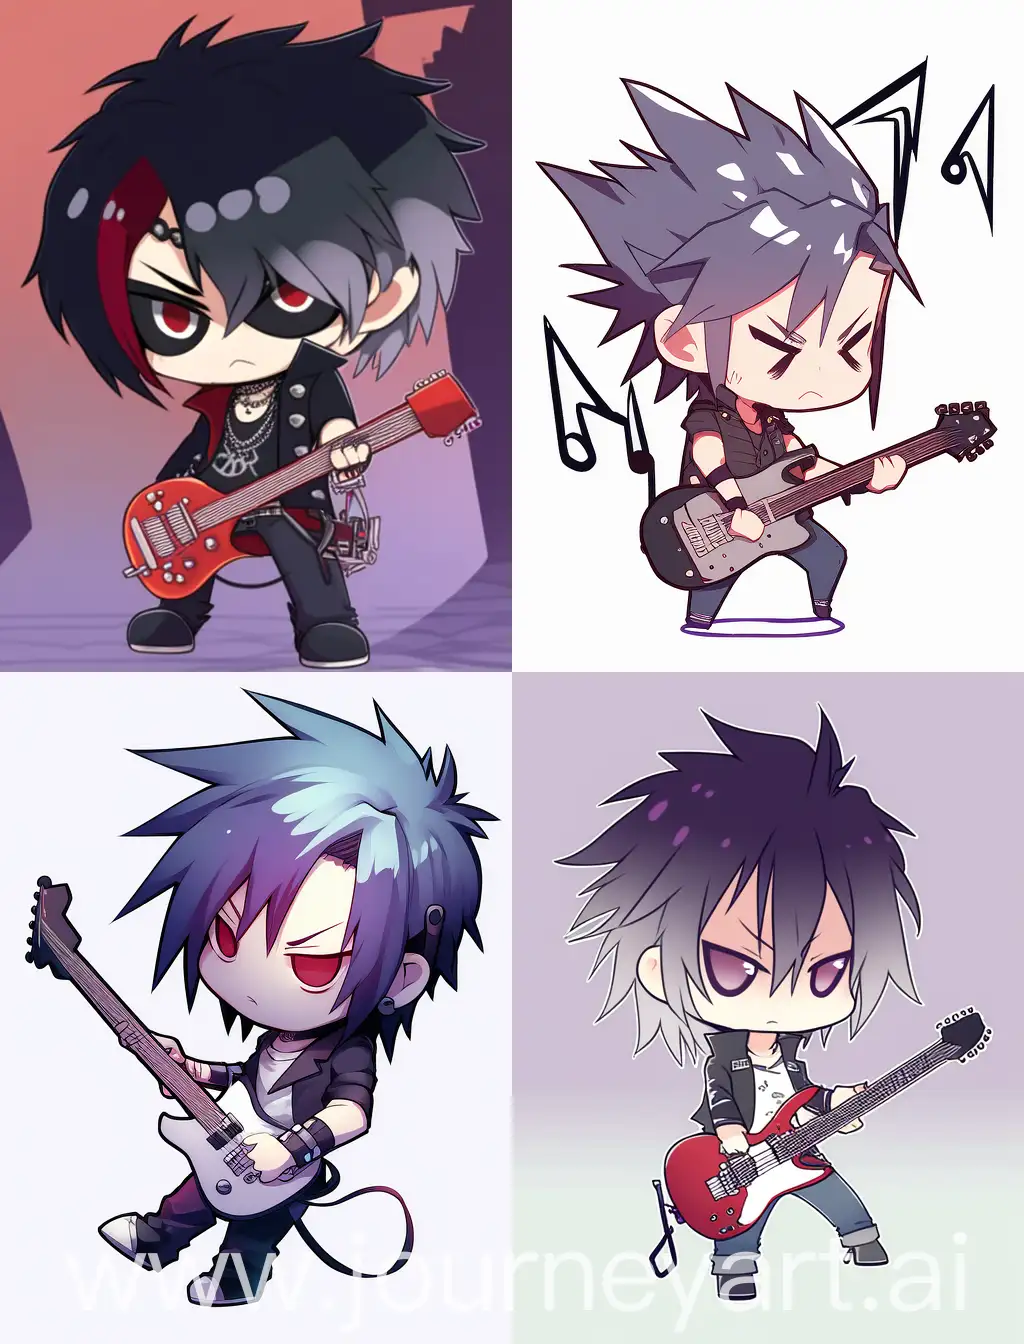 Chibi-Emo-Guy-Playing-Guitar-Cartoon-Anime-Style-with-Strong-Lines-on-Spooky-Background